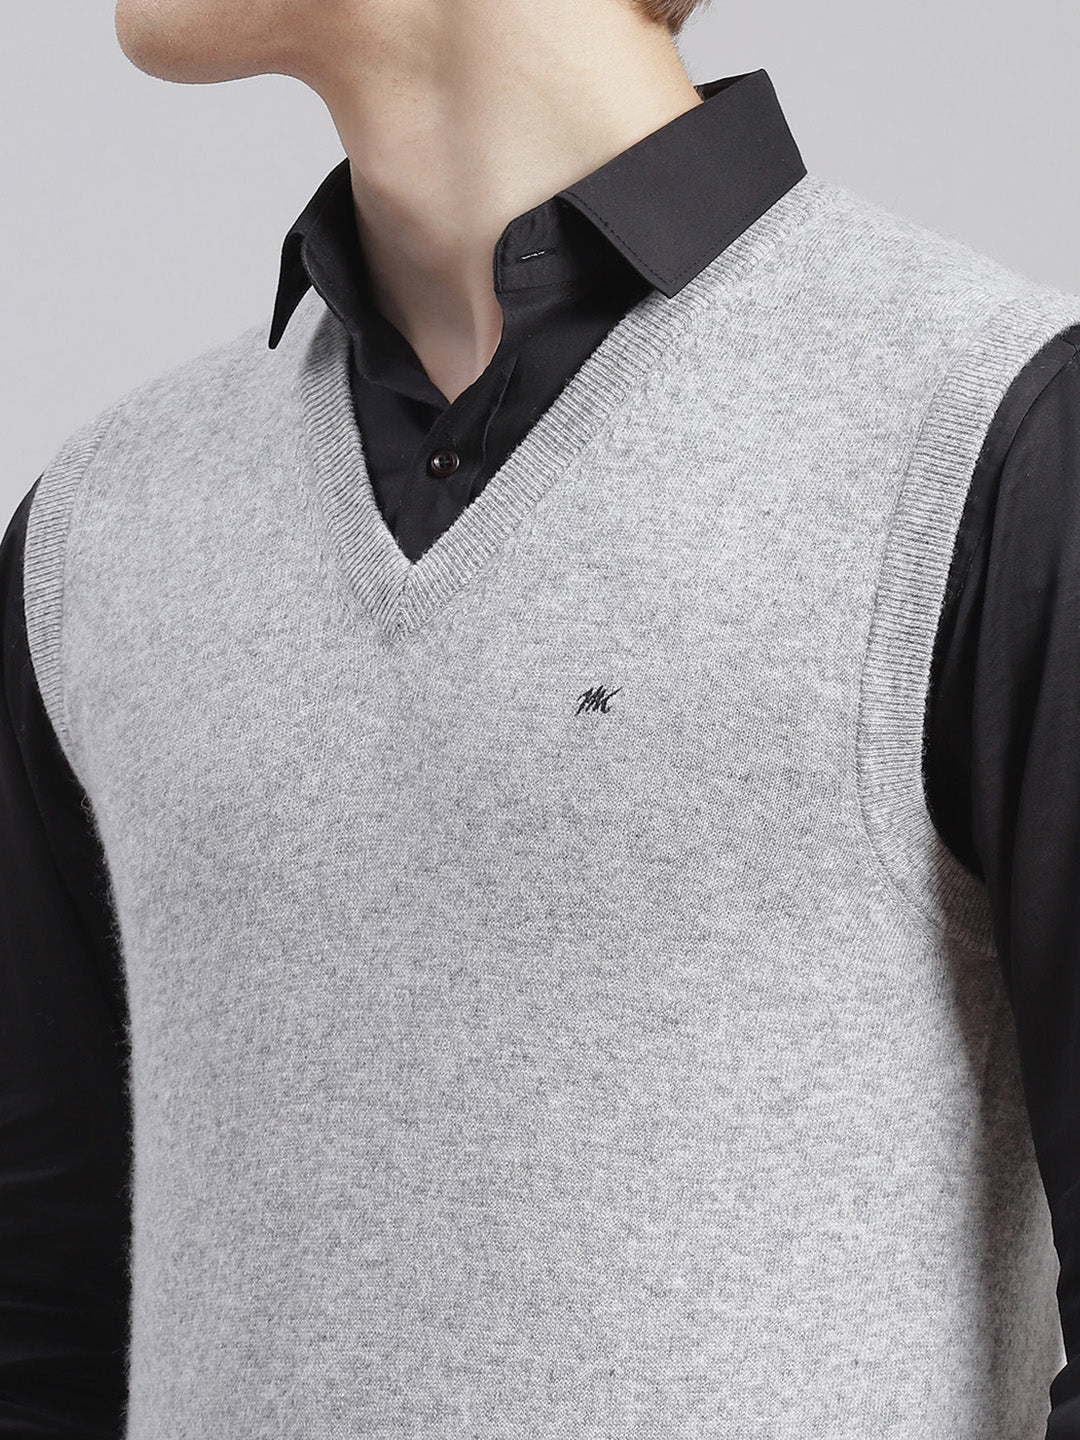 Men Grey Solid V Neck Sleeveless Sweaters/Pullovers